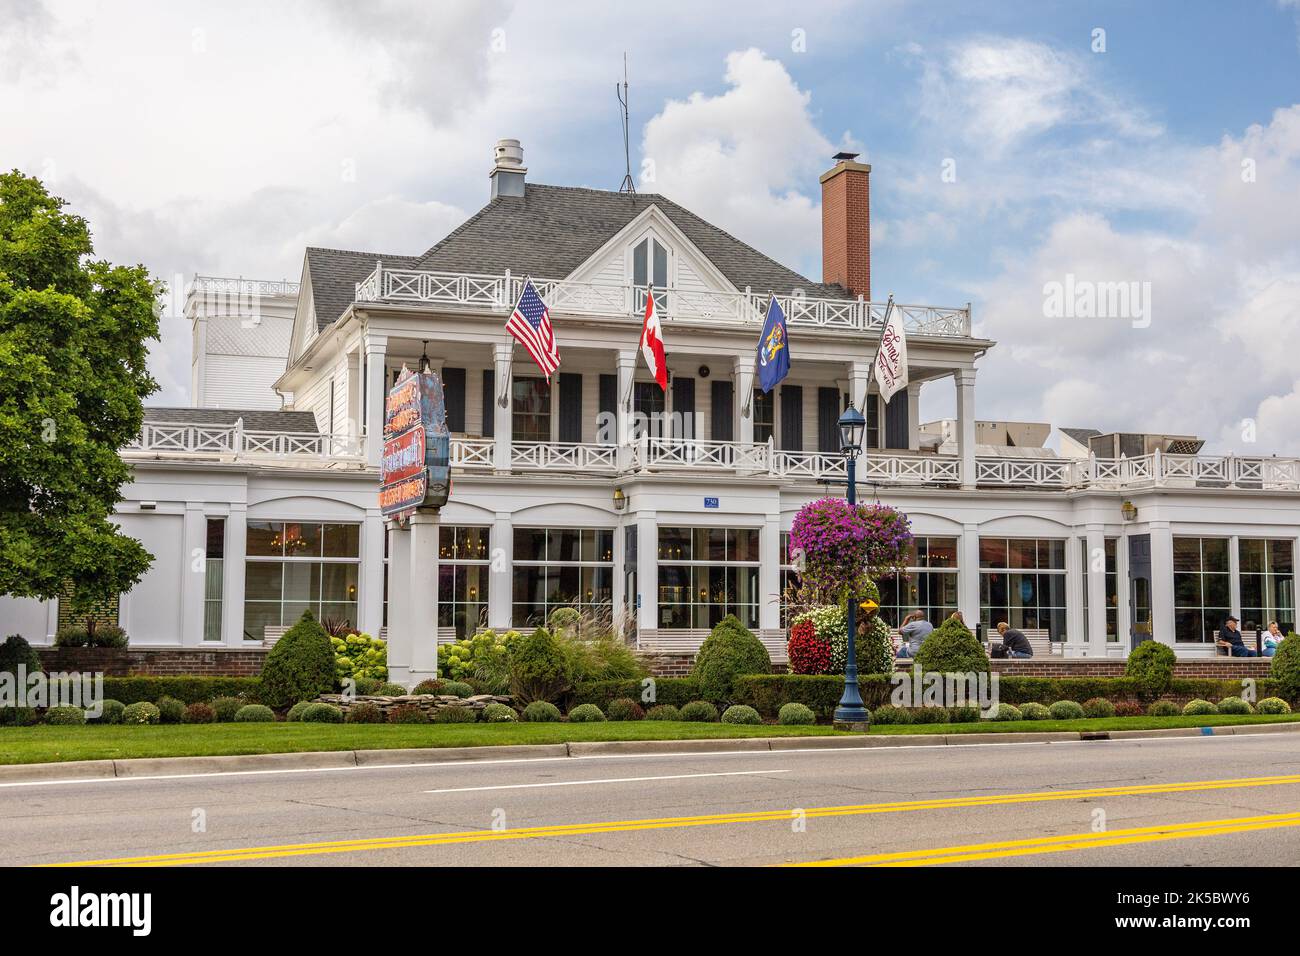 Zehnder's Famous Restaurant Frankenmuth Michigan, Famous For Serving Chicken Dinners And Bavarian Style Food, Building Exterior, Stock Photo